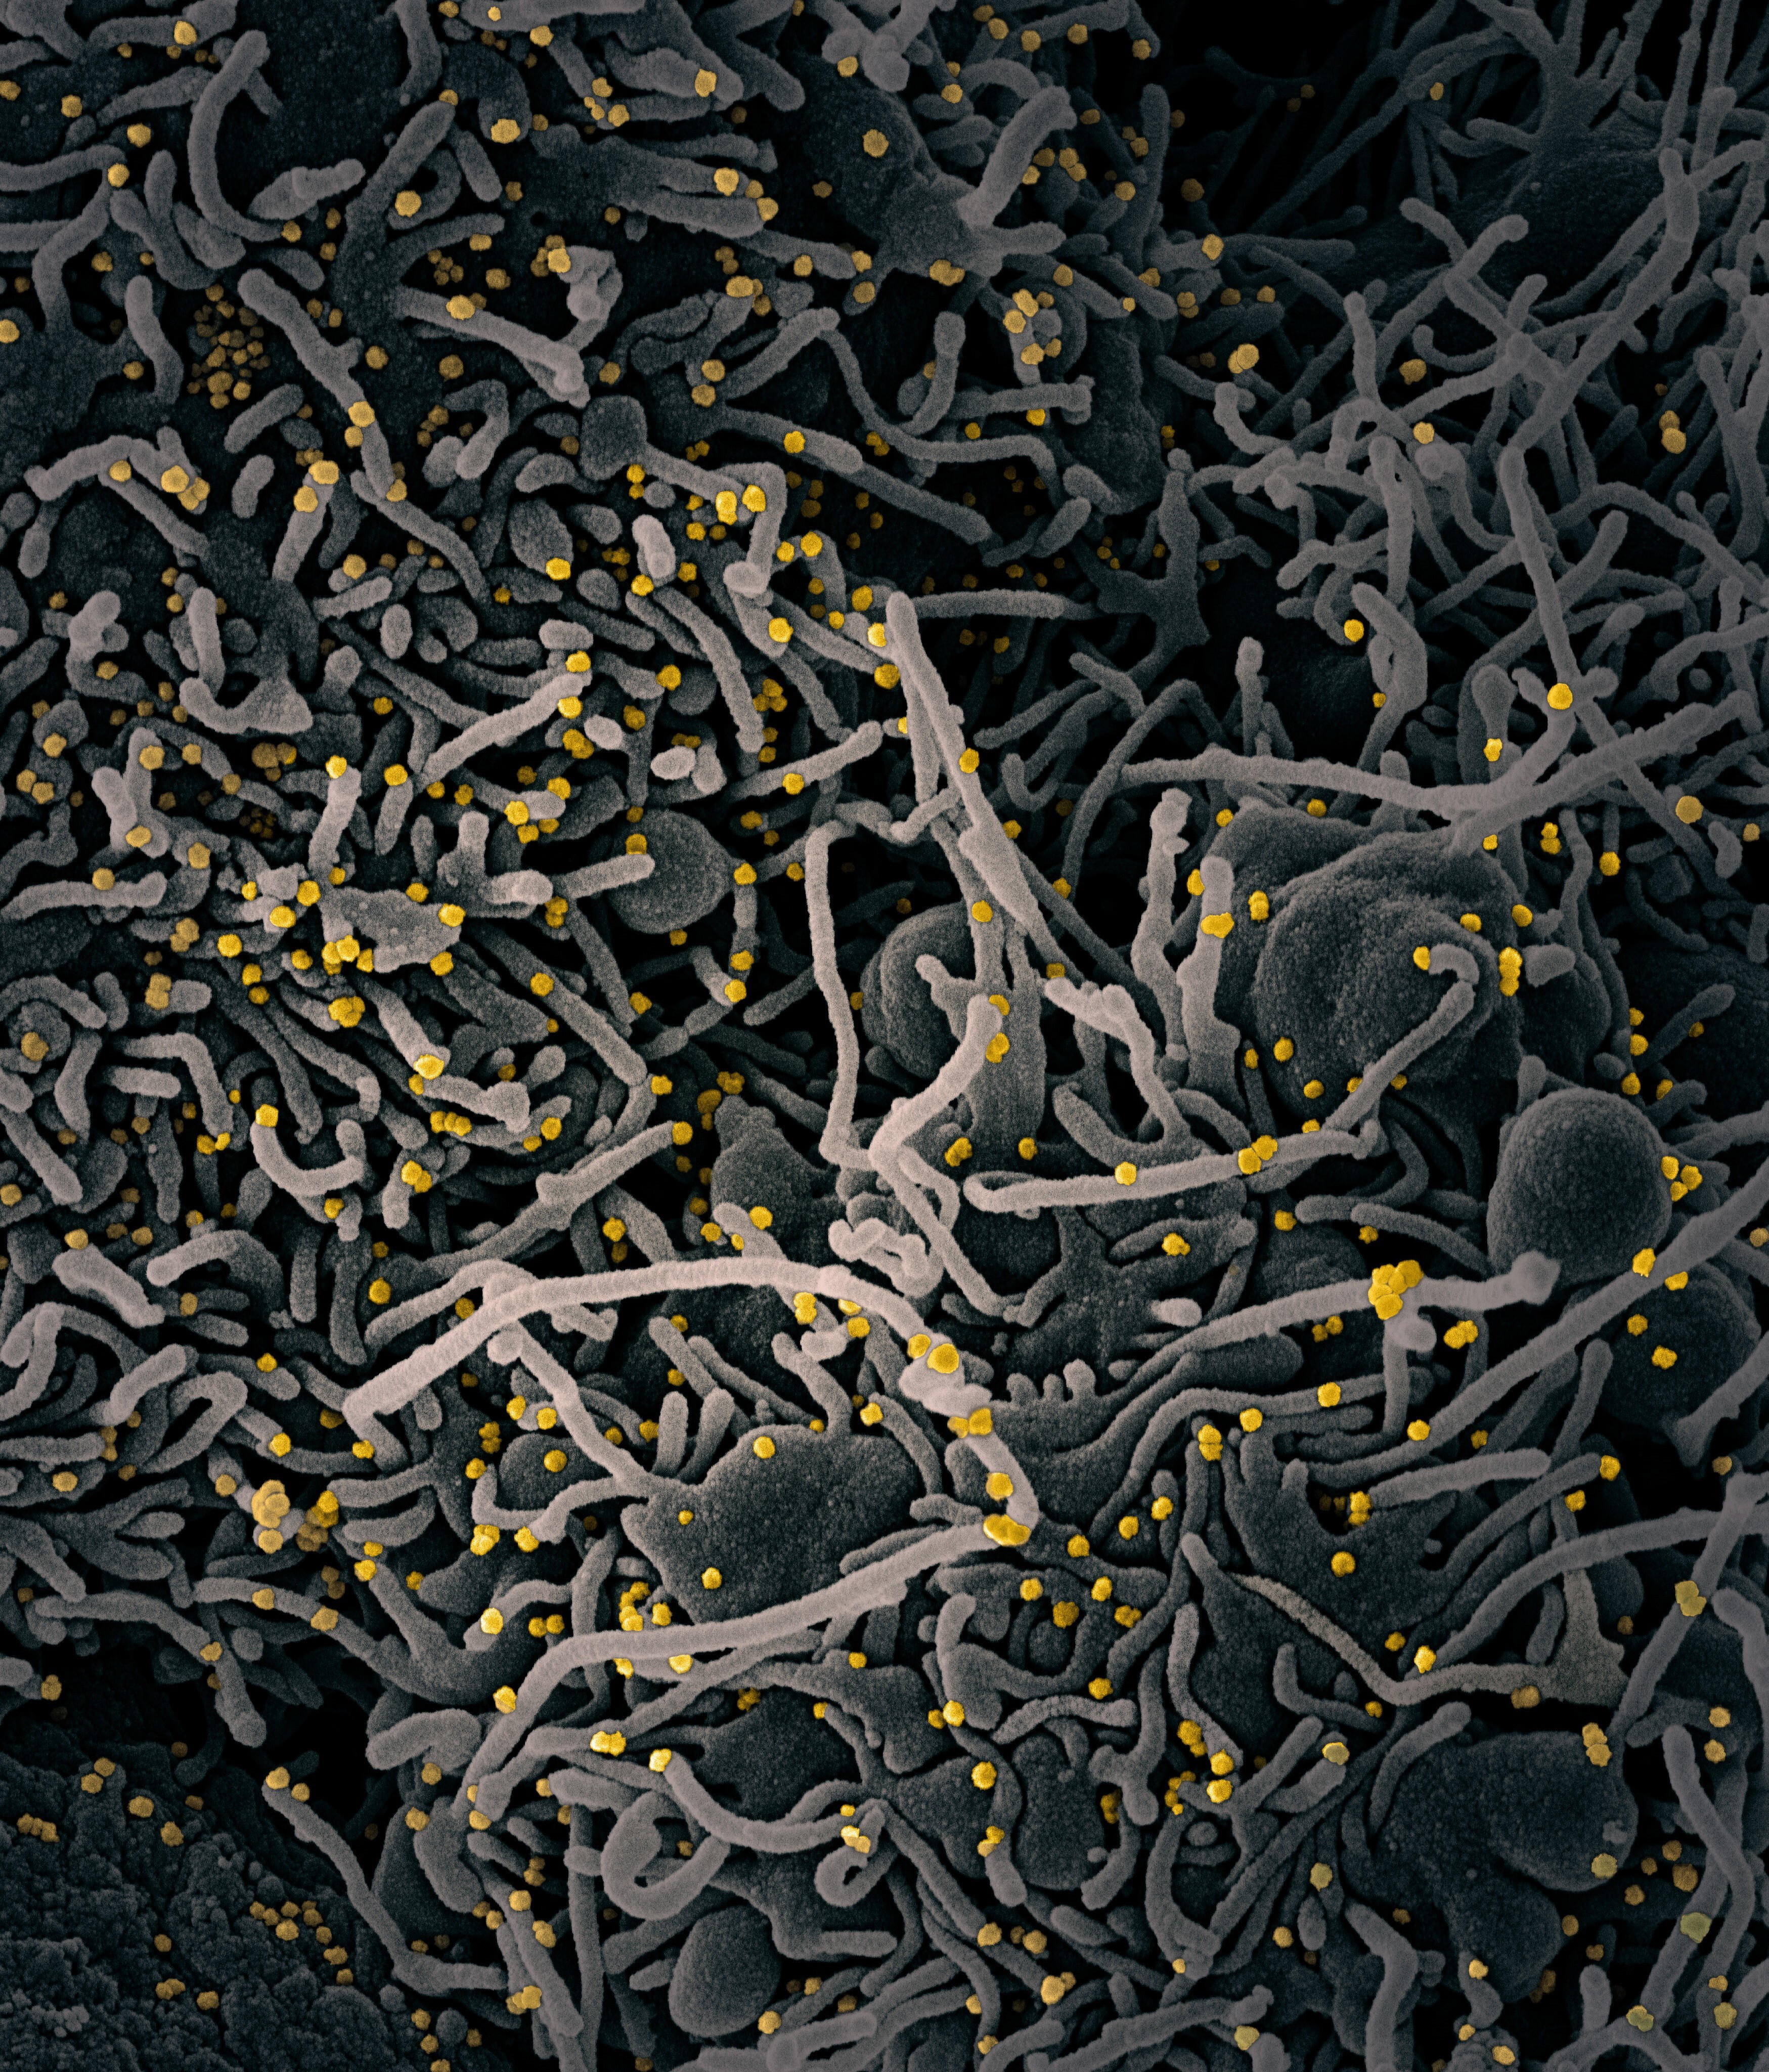 A scanning electron micrograph shows a cell with coronavirus particles in yellow. China has confirmed that some early samples were destroyed. Photo: EPA-EFE